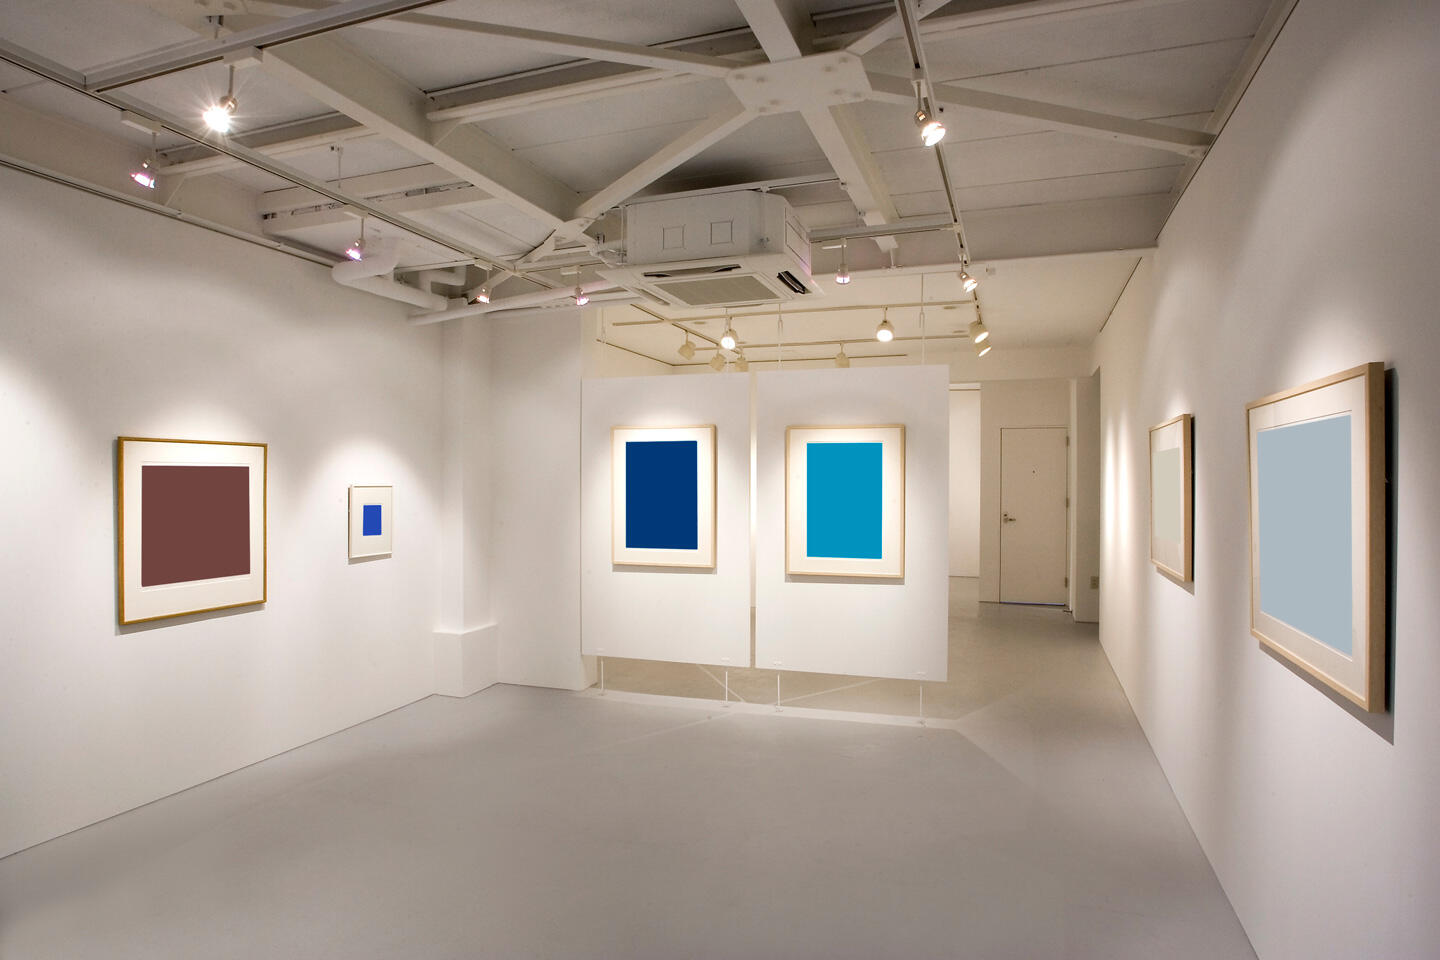 Minimalist interior of a modern art gallery at the Paris International Art Photography Fair, displaying a series of vividly colored framed photographs on white walls illuminated by spotlights. The clean setting highlights the exhibited works.